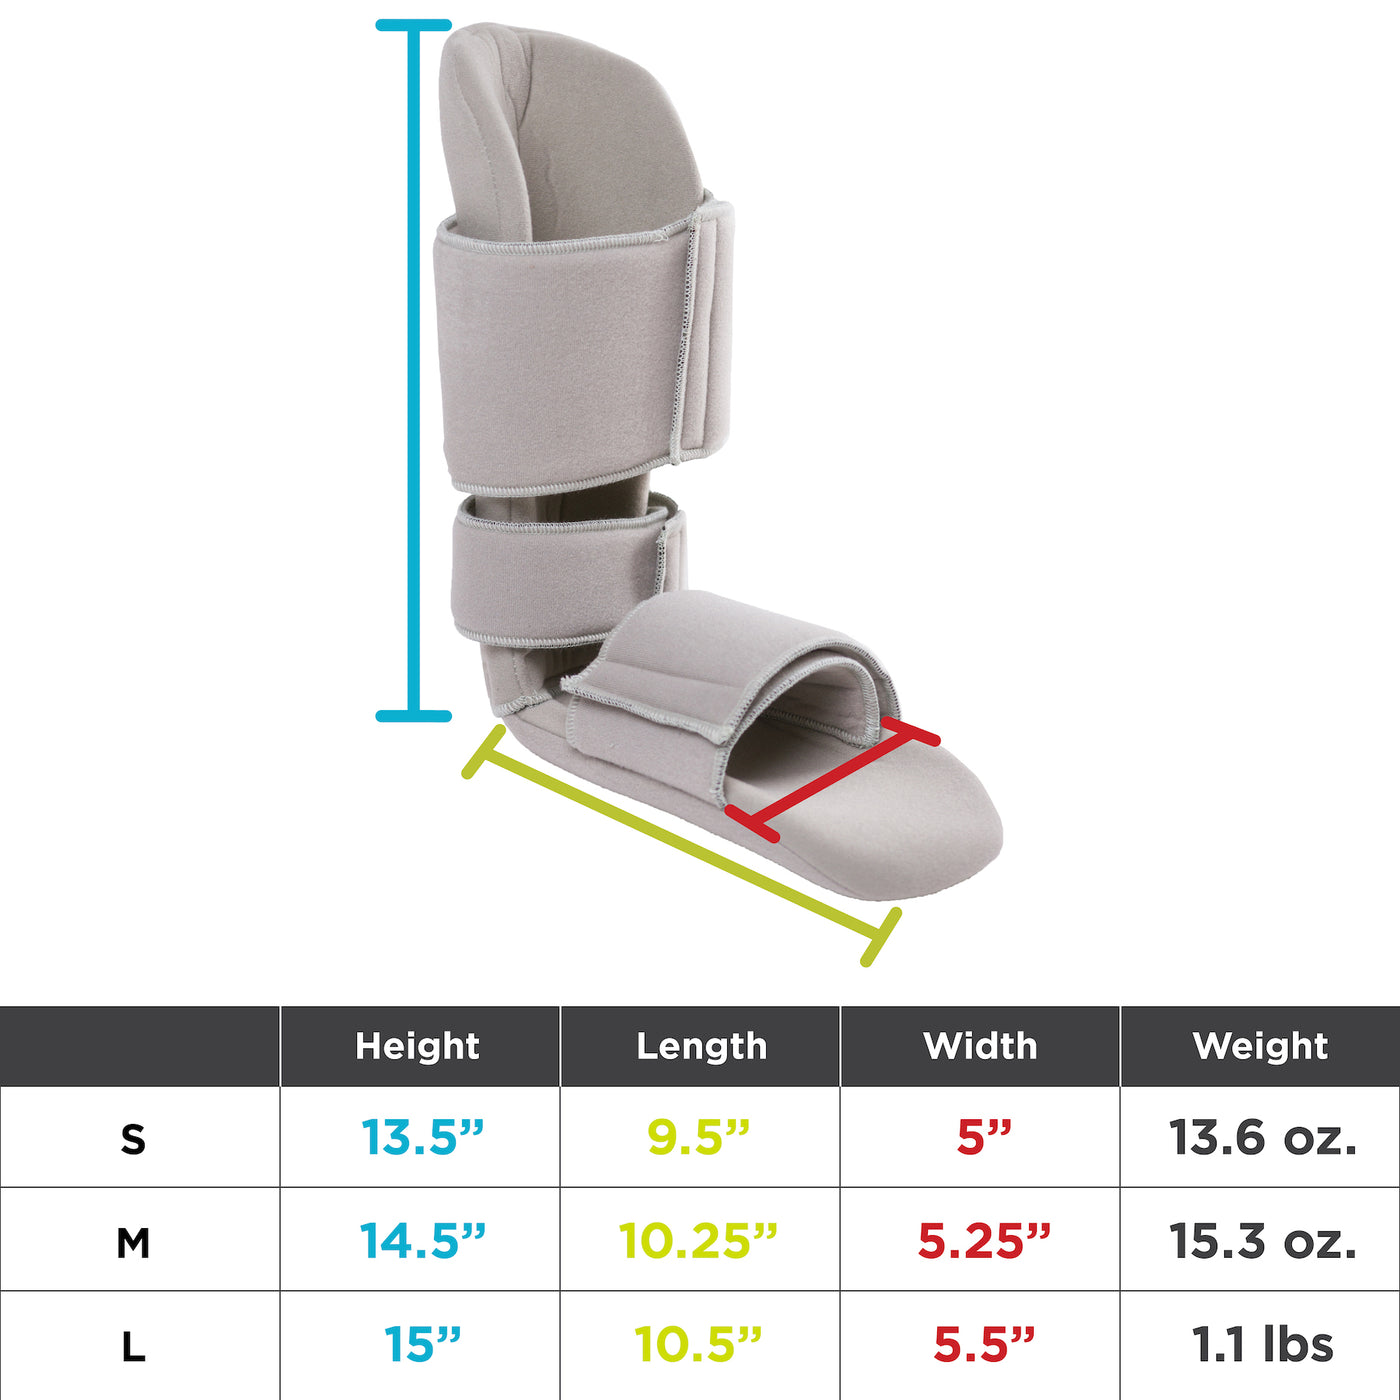 Chart showing the height, length, and width of the boot by size